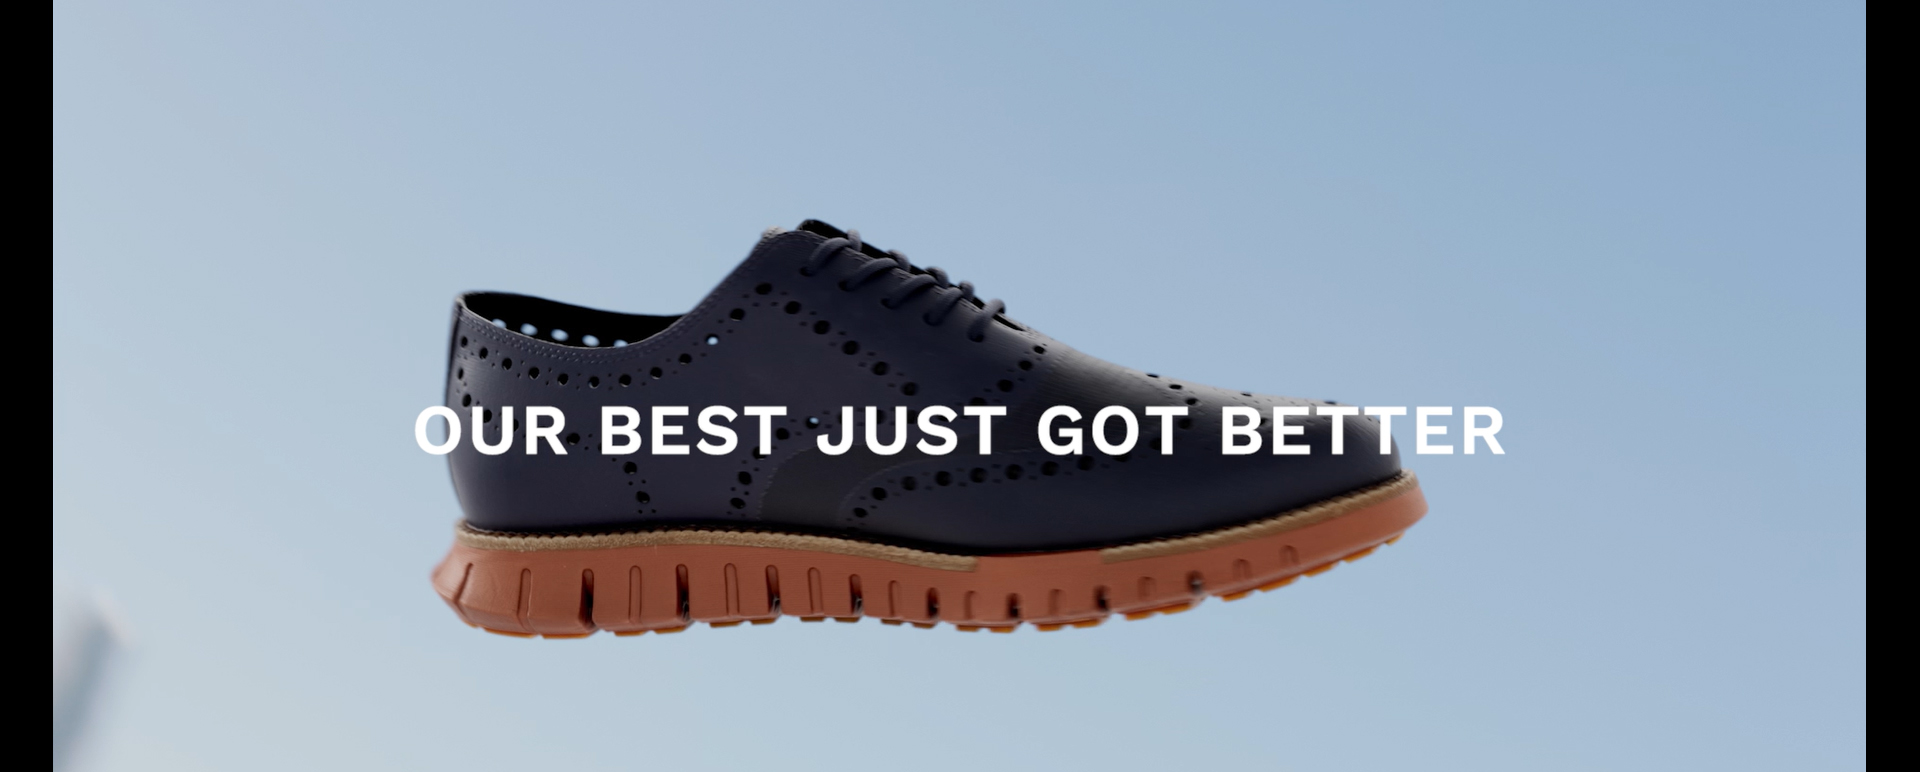 COLE HAAN CELEBRATES 10 YEARS OF ZERØGRAND - THE SHOE THAT REDEFINED MEN'S FOOTWEAR - WITH THE INTRODUCTION OF ZERØGRAND REMASTERED